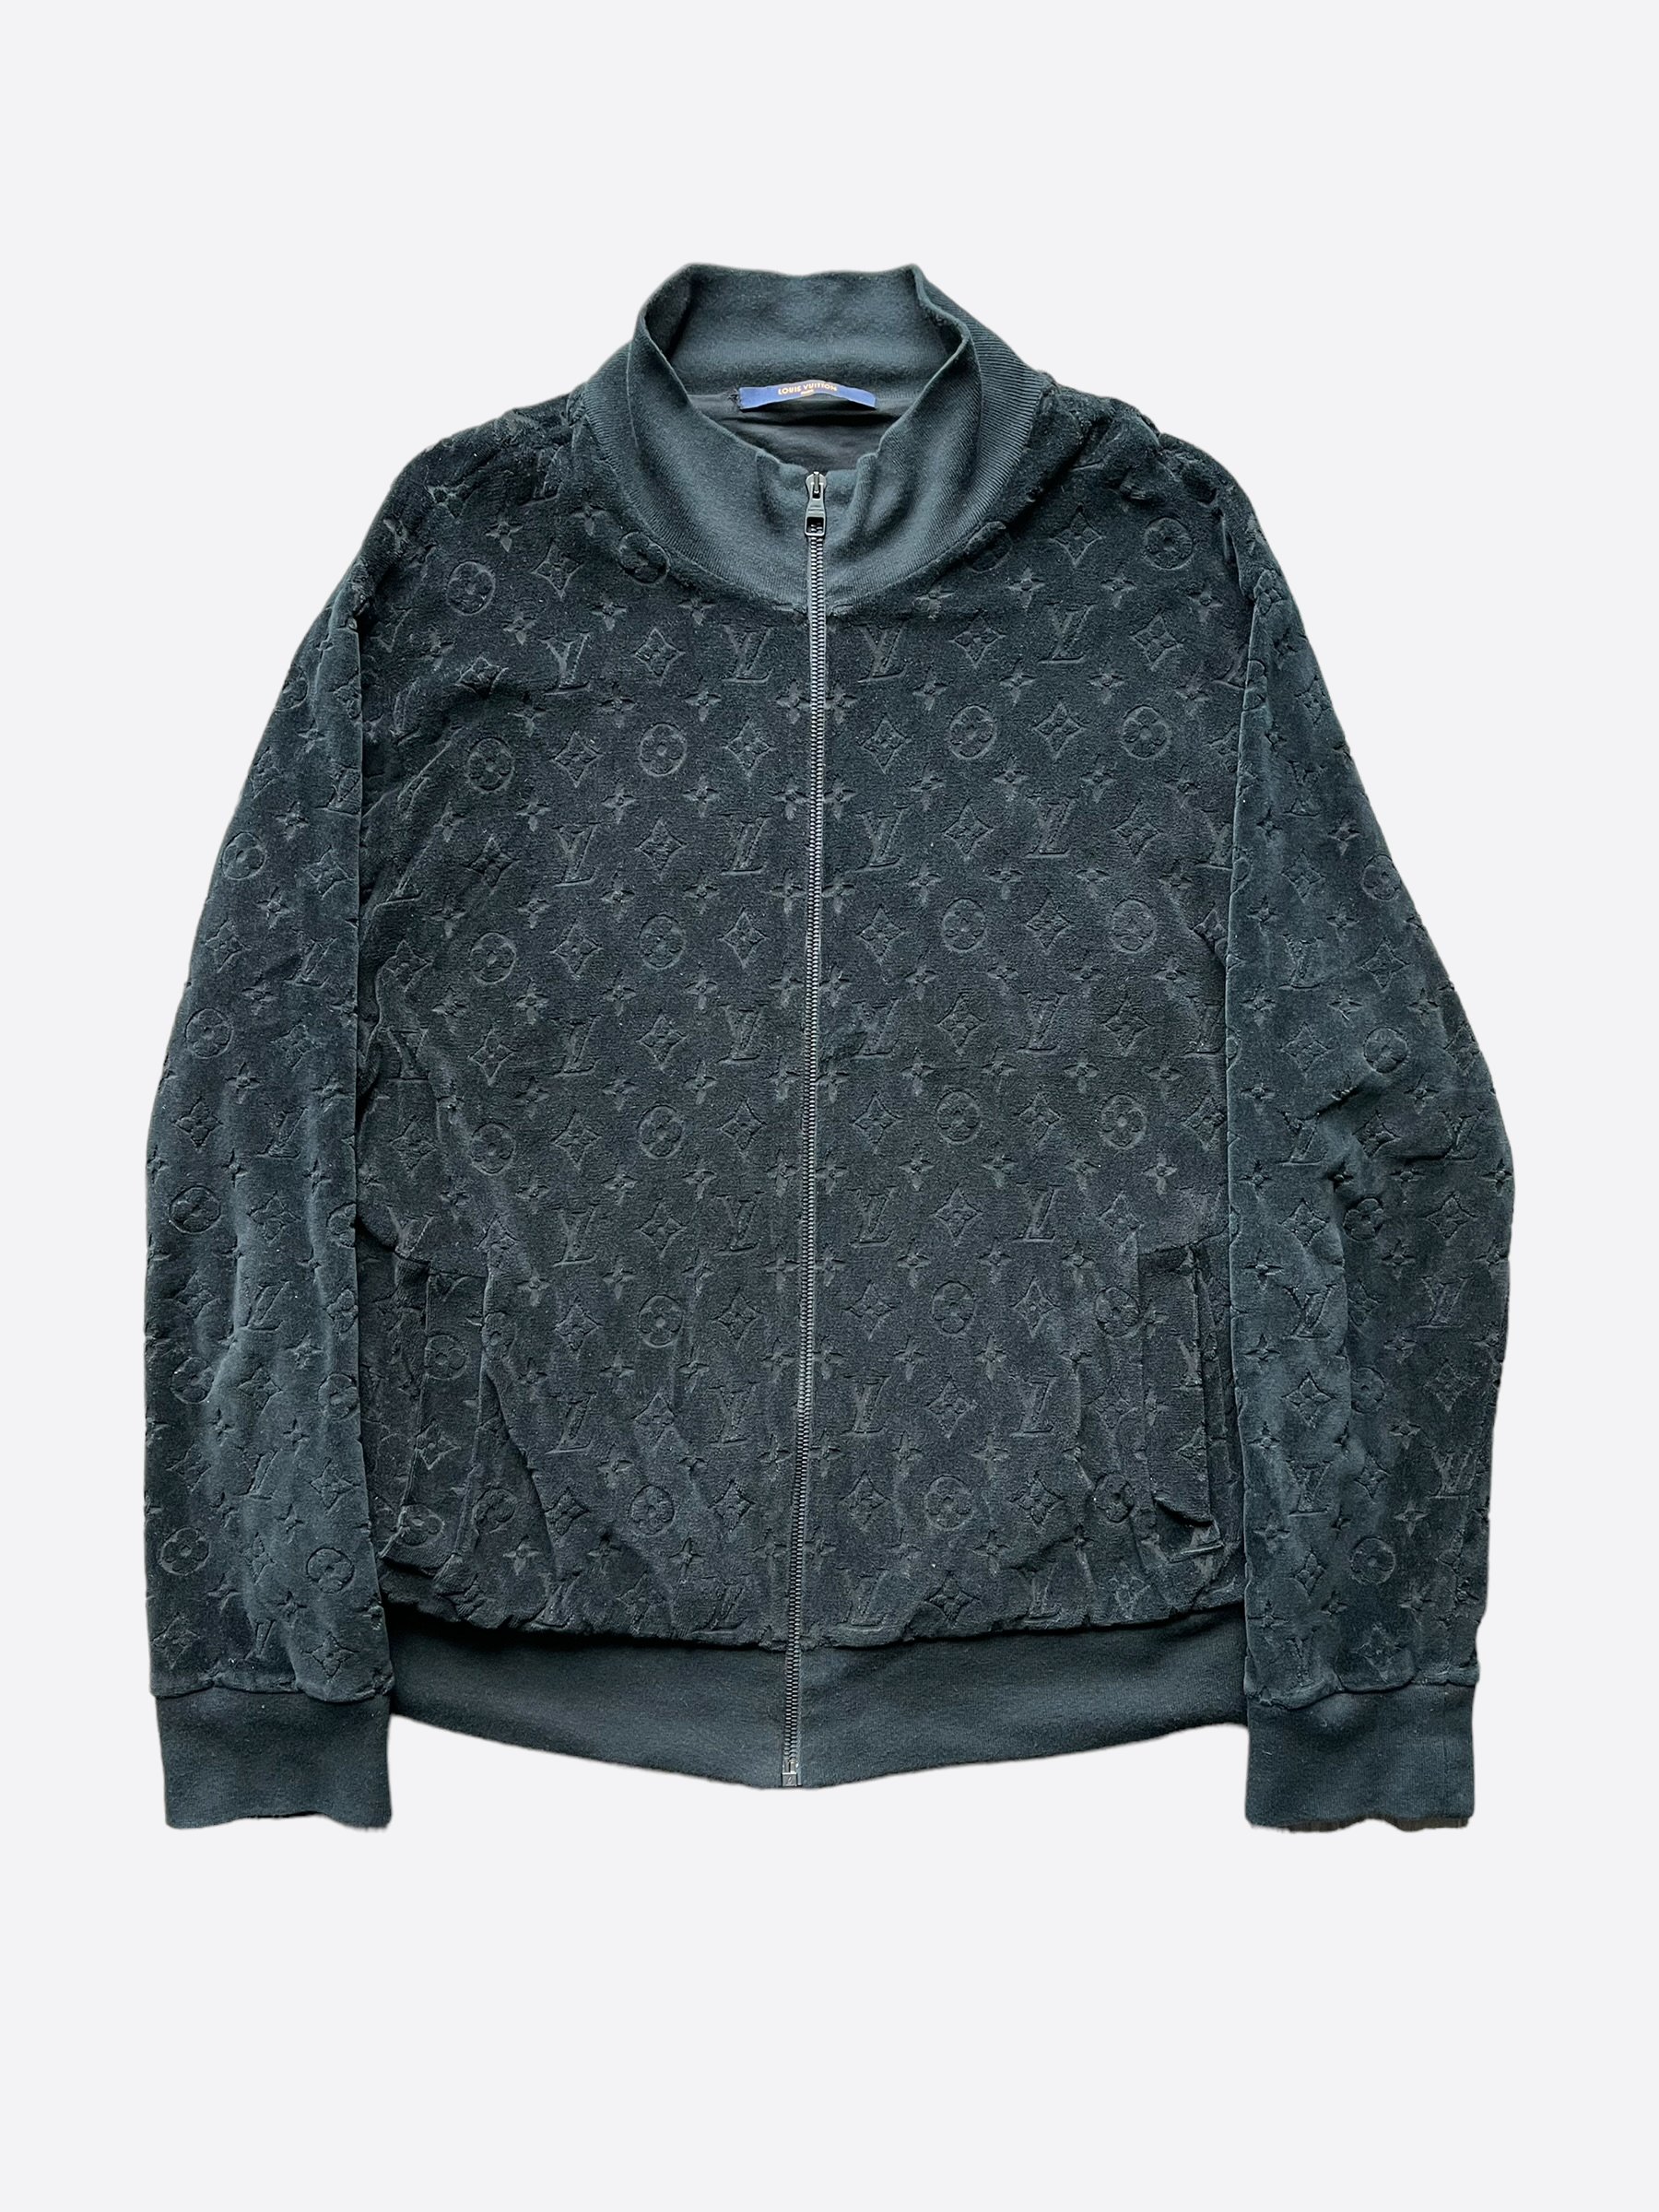 louis vuitton coats and jackets